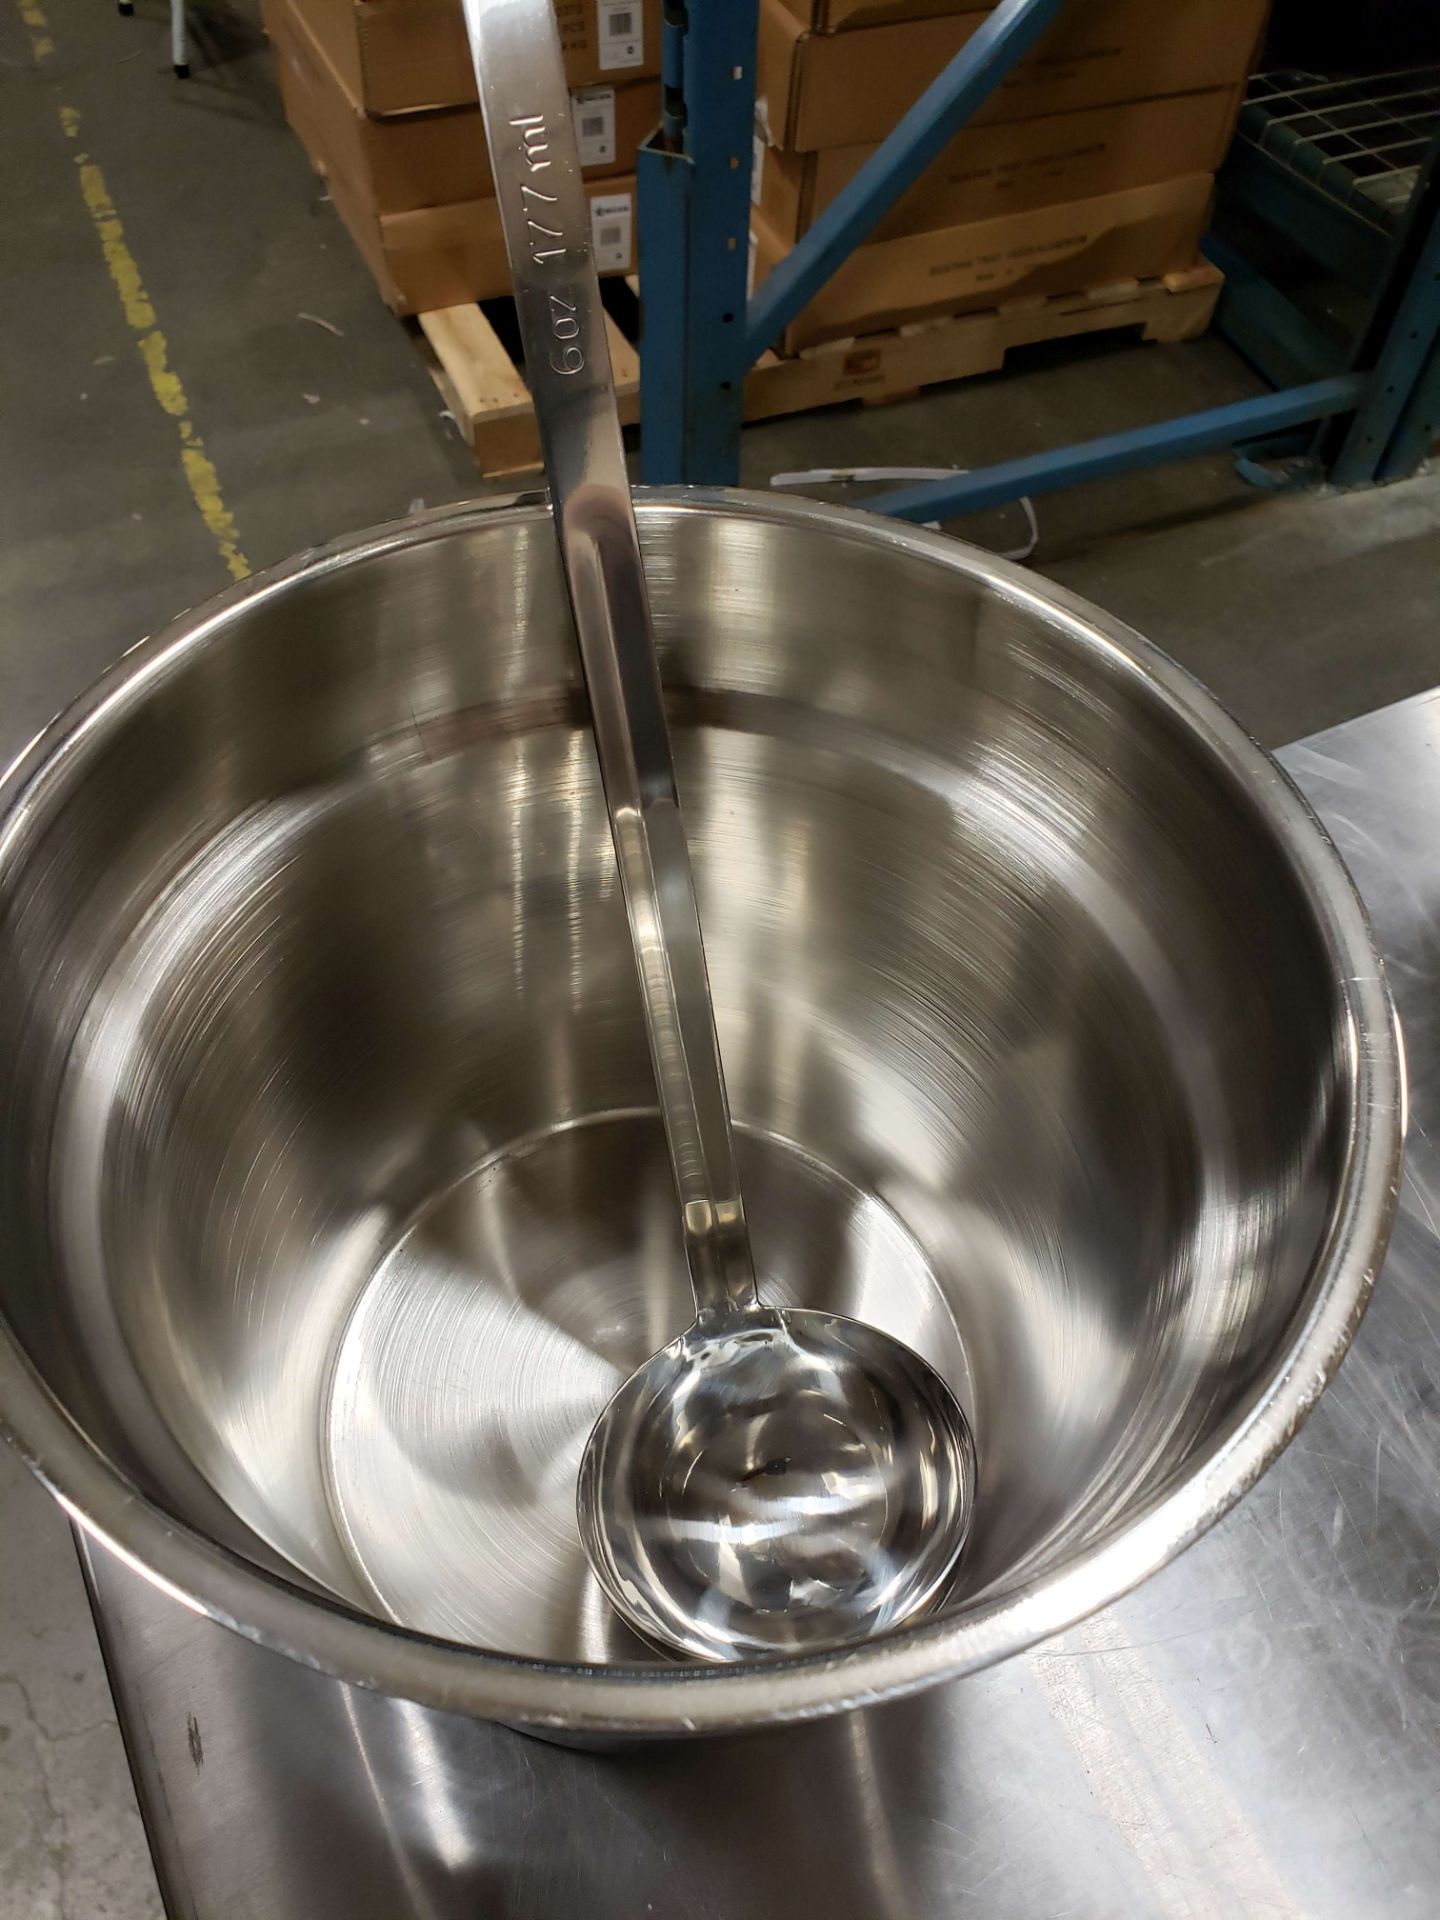 Stainless 7 QT Round Insert with Lid & 6oz Ladle - Image 3 of 3